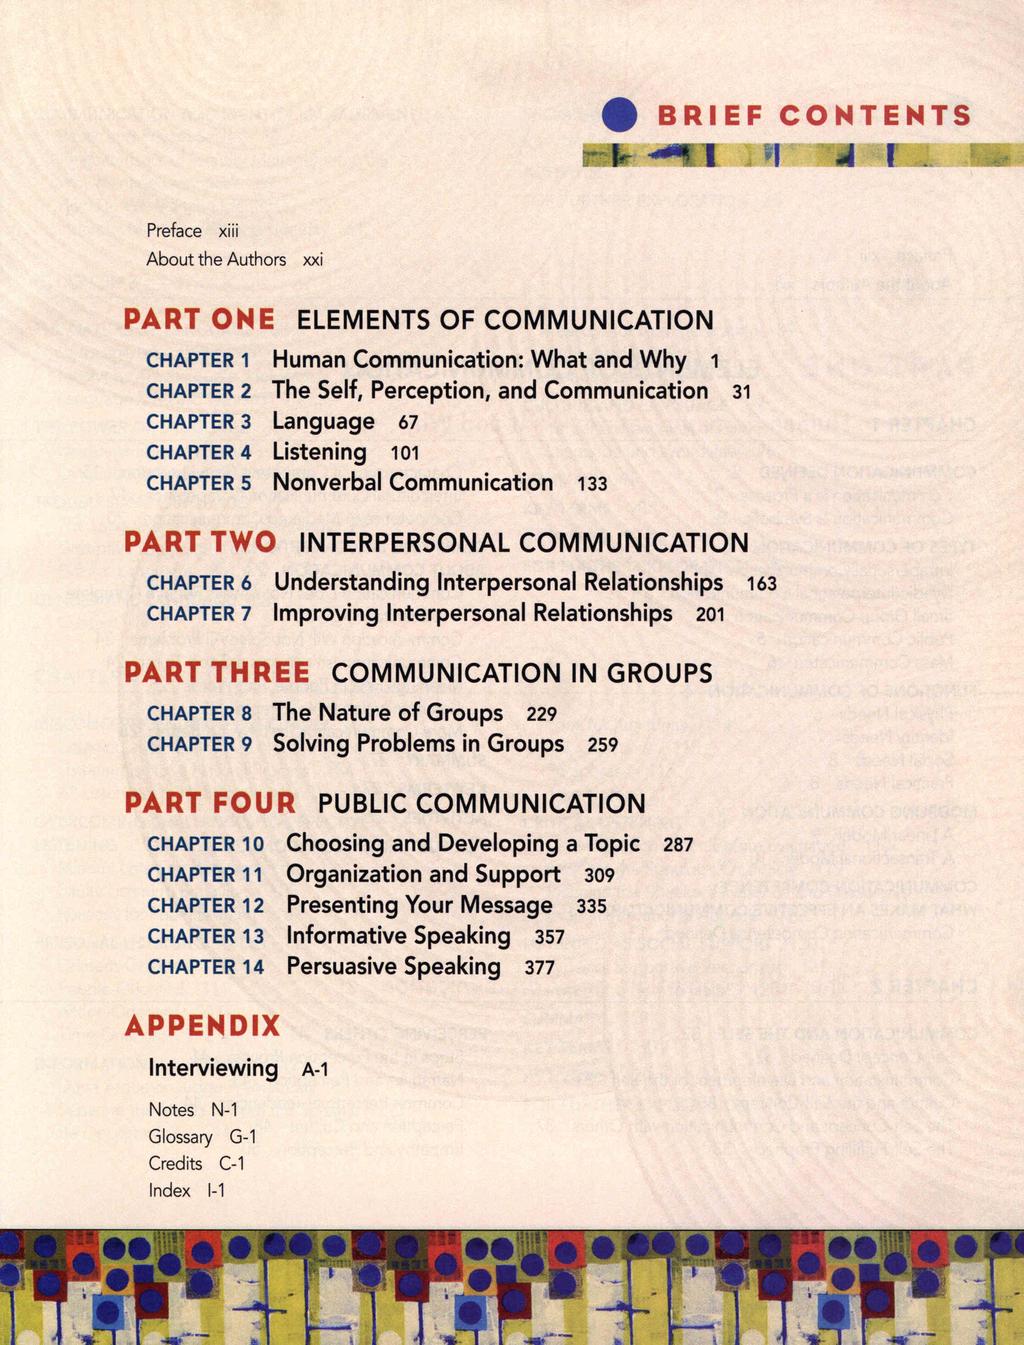 e BRIEF CONTENTS Preface xiii About the Authors xxi PART ONE ELEMENTS OF COMMUNICATION CHAPTER 1 Human Communication: What and Why 1 CHAPTER 2 The Self, Perception, and Communication 31 CHAPTER 3